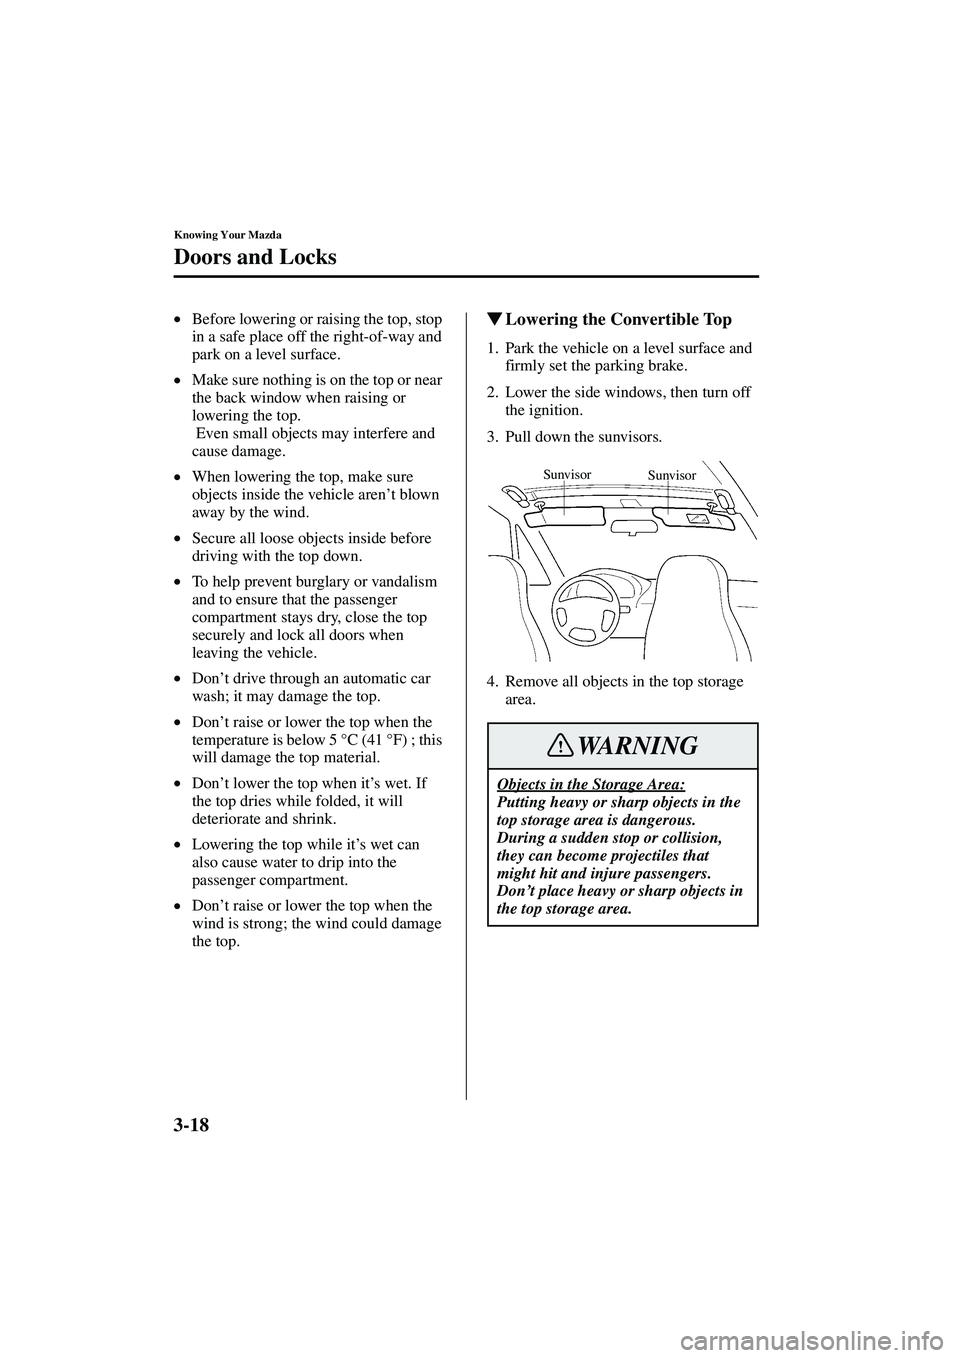 MAZDA MODEL MX-5 MIATA 2003  Owners Manual 3-18
Knowing Your Mazda
Doors and Locks
Form No. 8R09-EA-02G
•Before lowering or raising the top, stop 
in a safe place off the right-of-way and 
park on a level surface.
• Make sure nothing is on